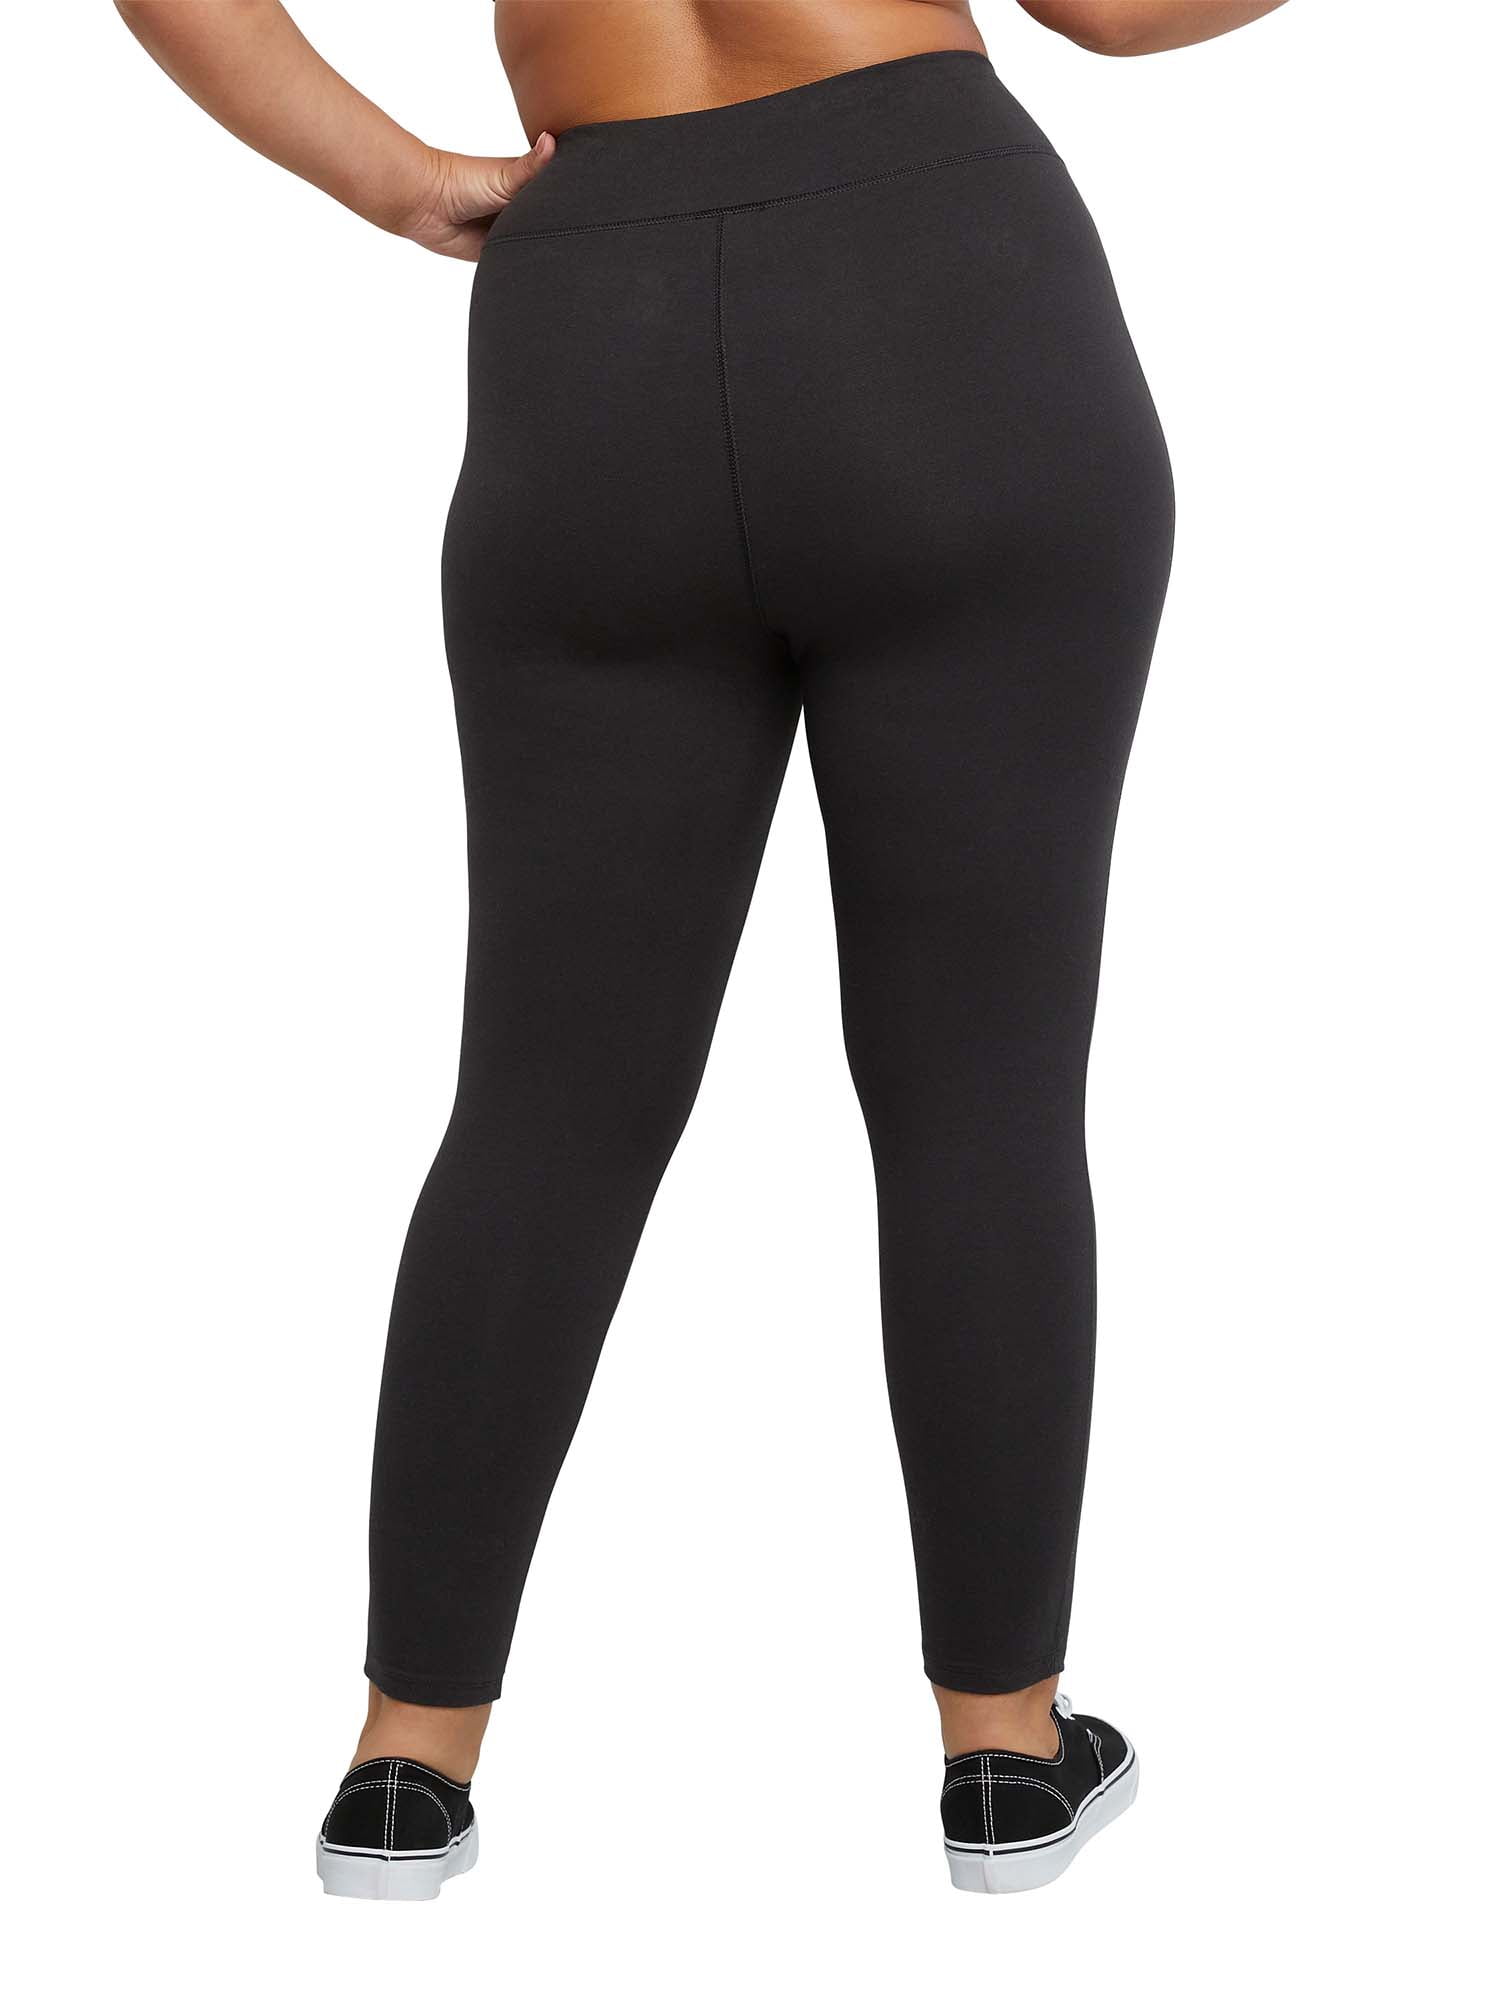 Hanes Sport Performance Leggings, Walmart's Workout Clothes Are Next-Level  Cute and Seriously Affordable